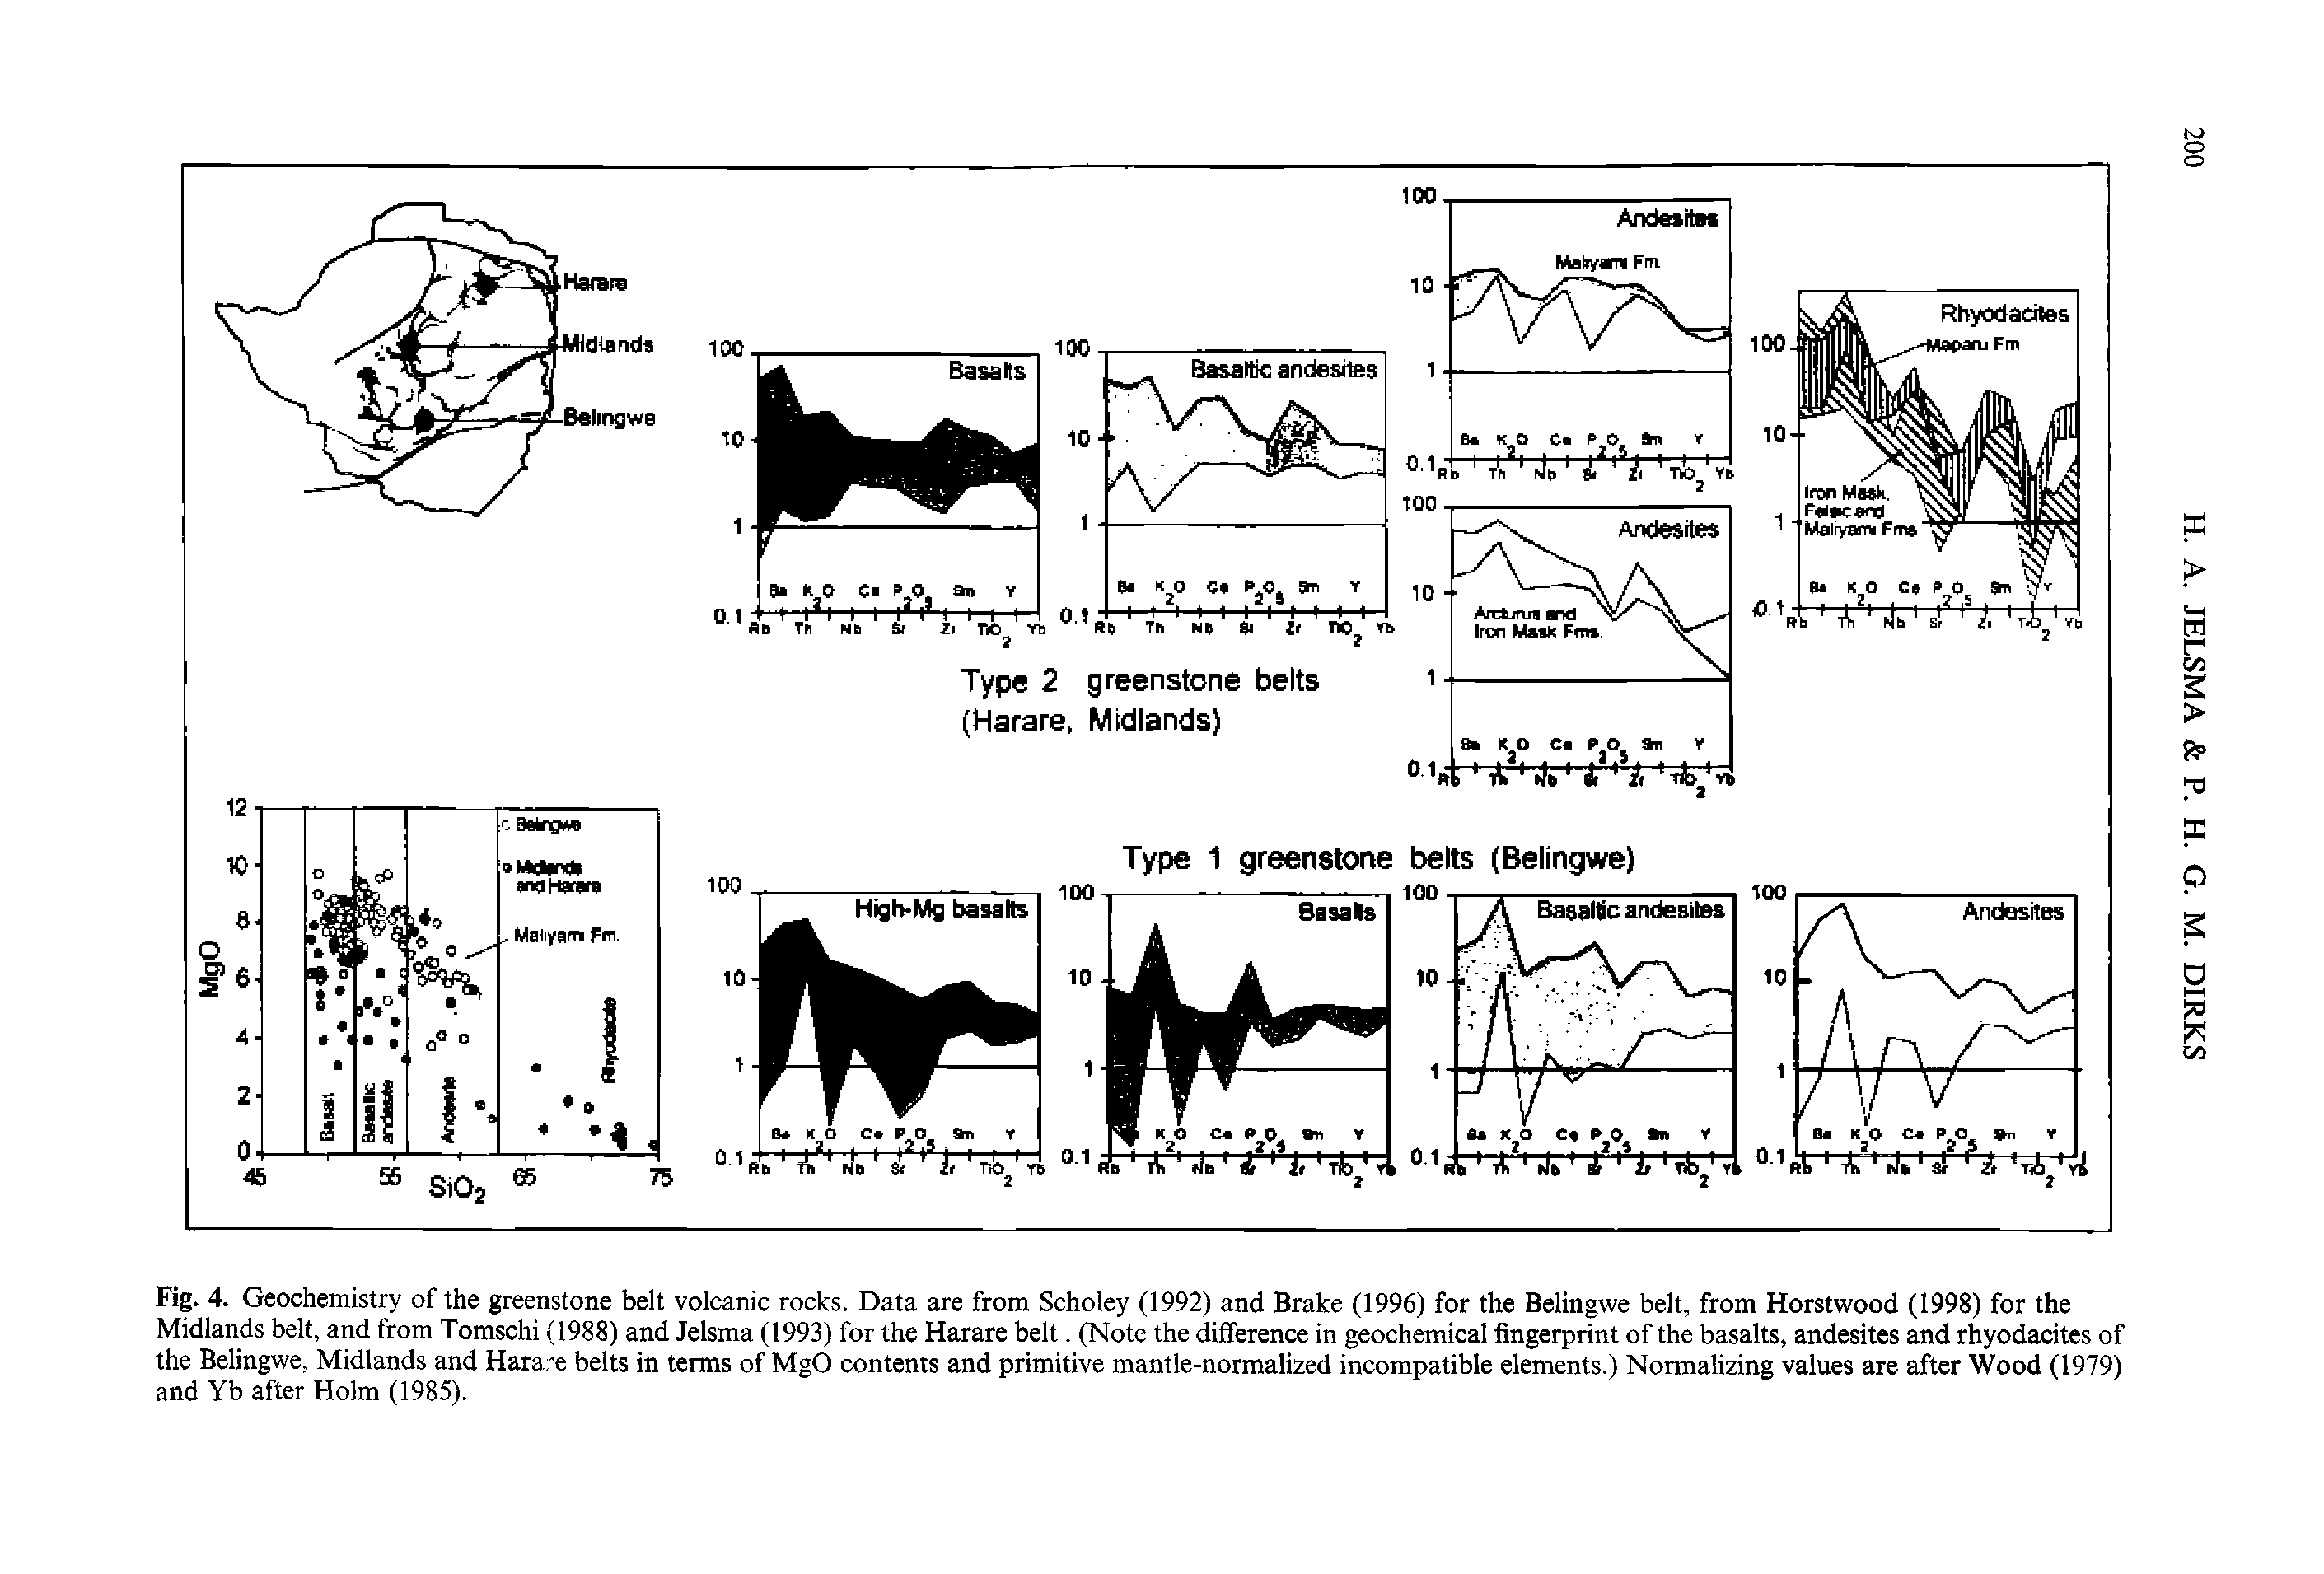 Fig. 4. Geochemistry of the greenstone belt volcanic rocks. Data are from Scholey (1992) and Brake (1996) for the Belingwe belt, from Horstwood (1998) for the Midlands belt, and from Tomschi (1988) and Jelsma (1993) for the Harare belt. (Note the difference in geochemical fingerprint of the basalts, andesites and rhyodacites of the Belingwe, Midlands and Harax belts in terms of MgO contents and primitive mantle-normalized incompatible elements.) Normalizing values are after Wood (1979) and Yb after Holm (1985).